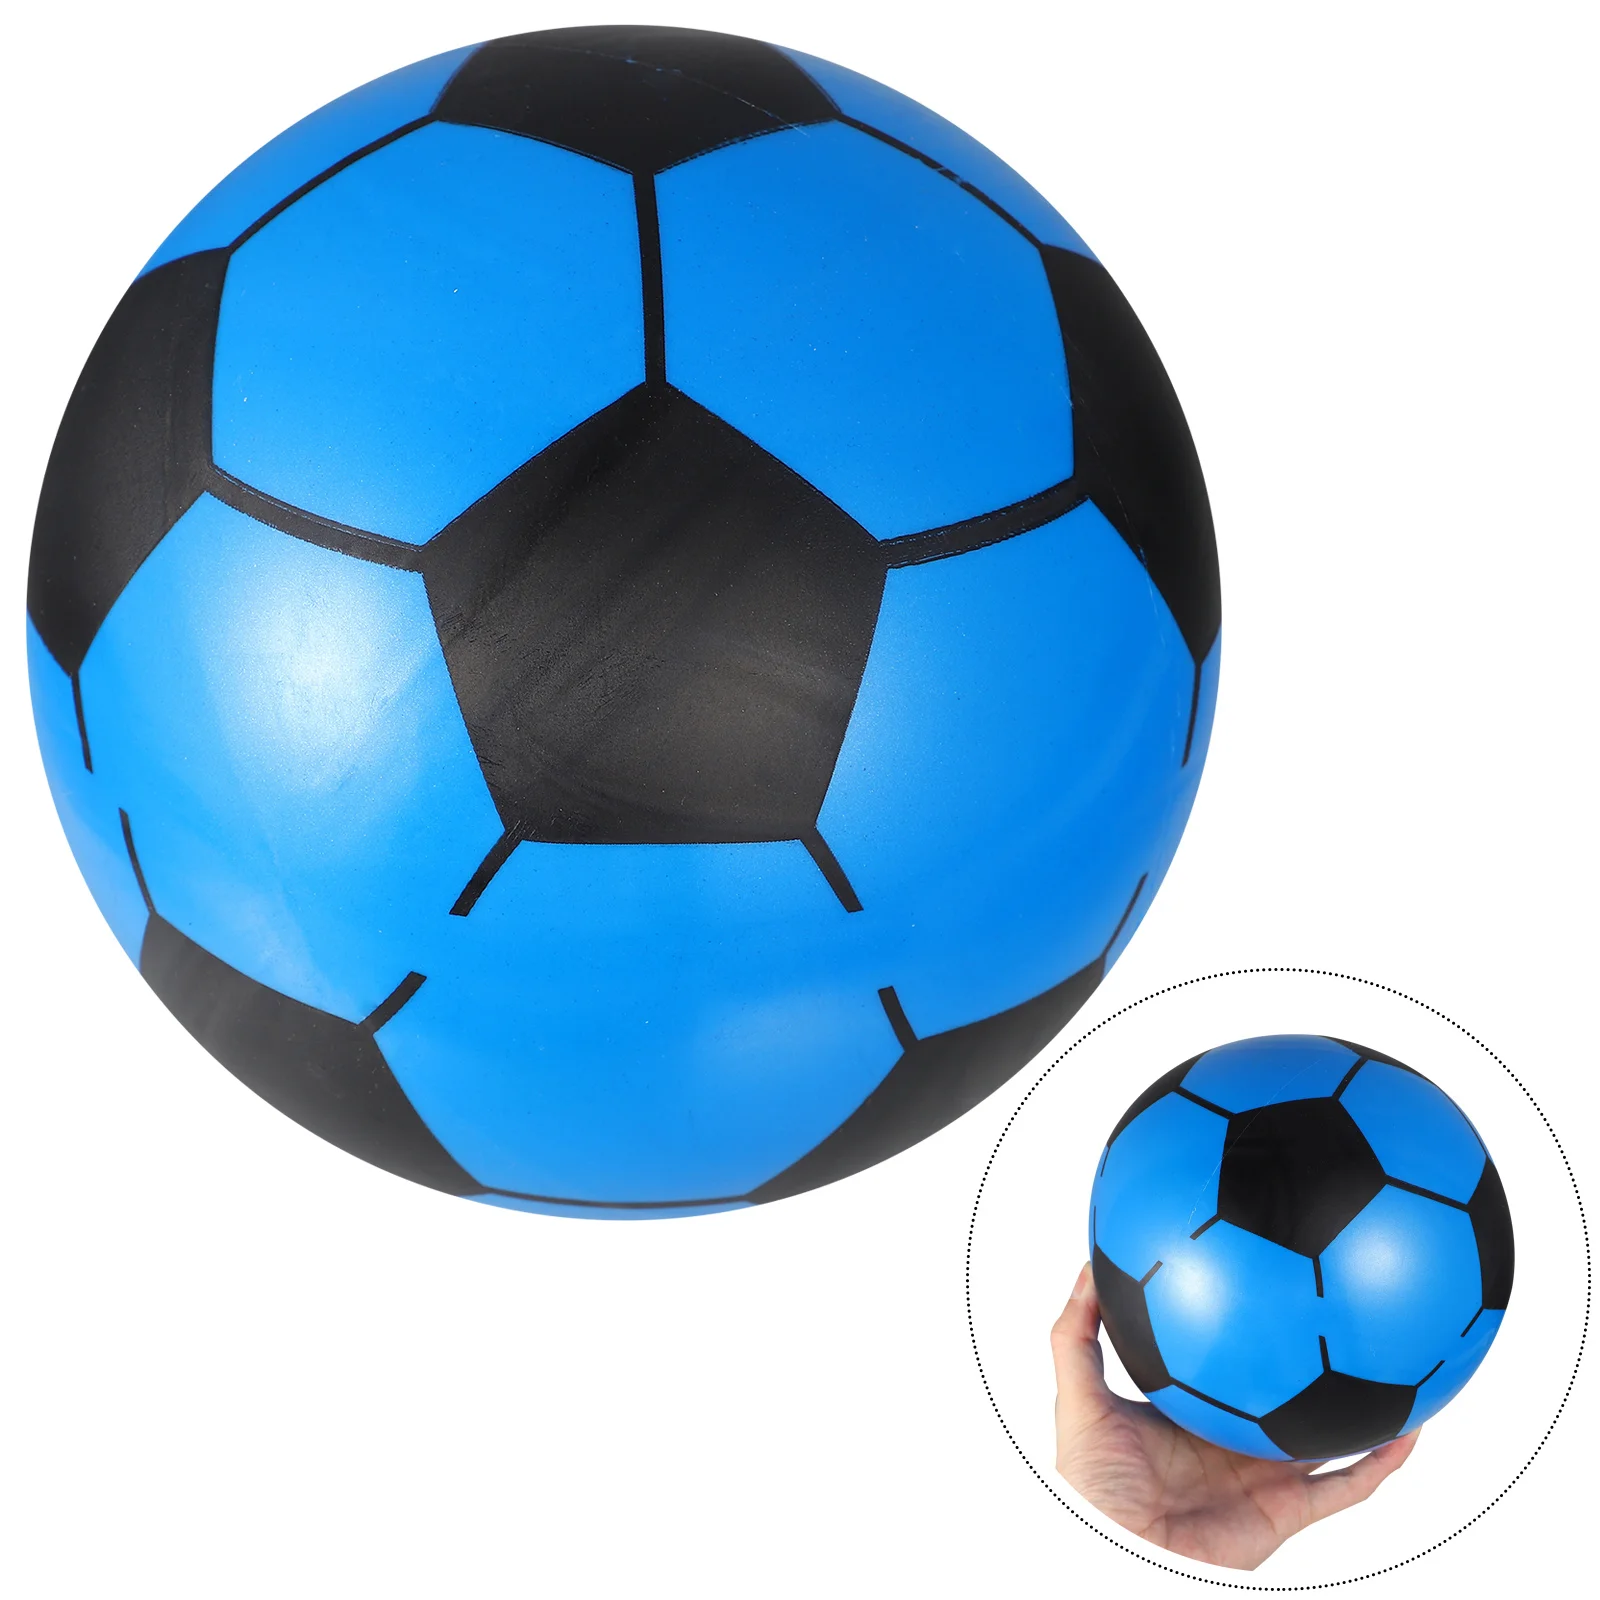 20cm Inflatable Soccer Ball Toy Football Water Balloon Swimming Pool Outdo - $13.89